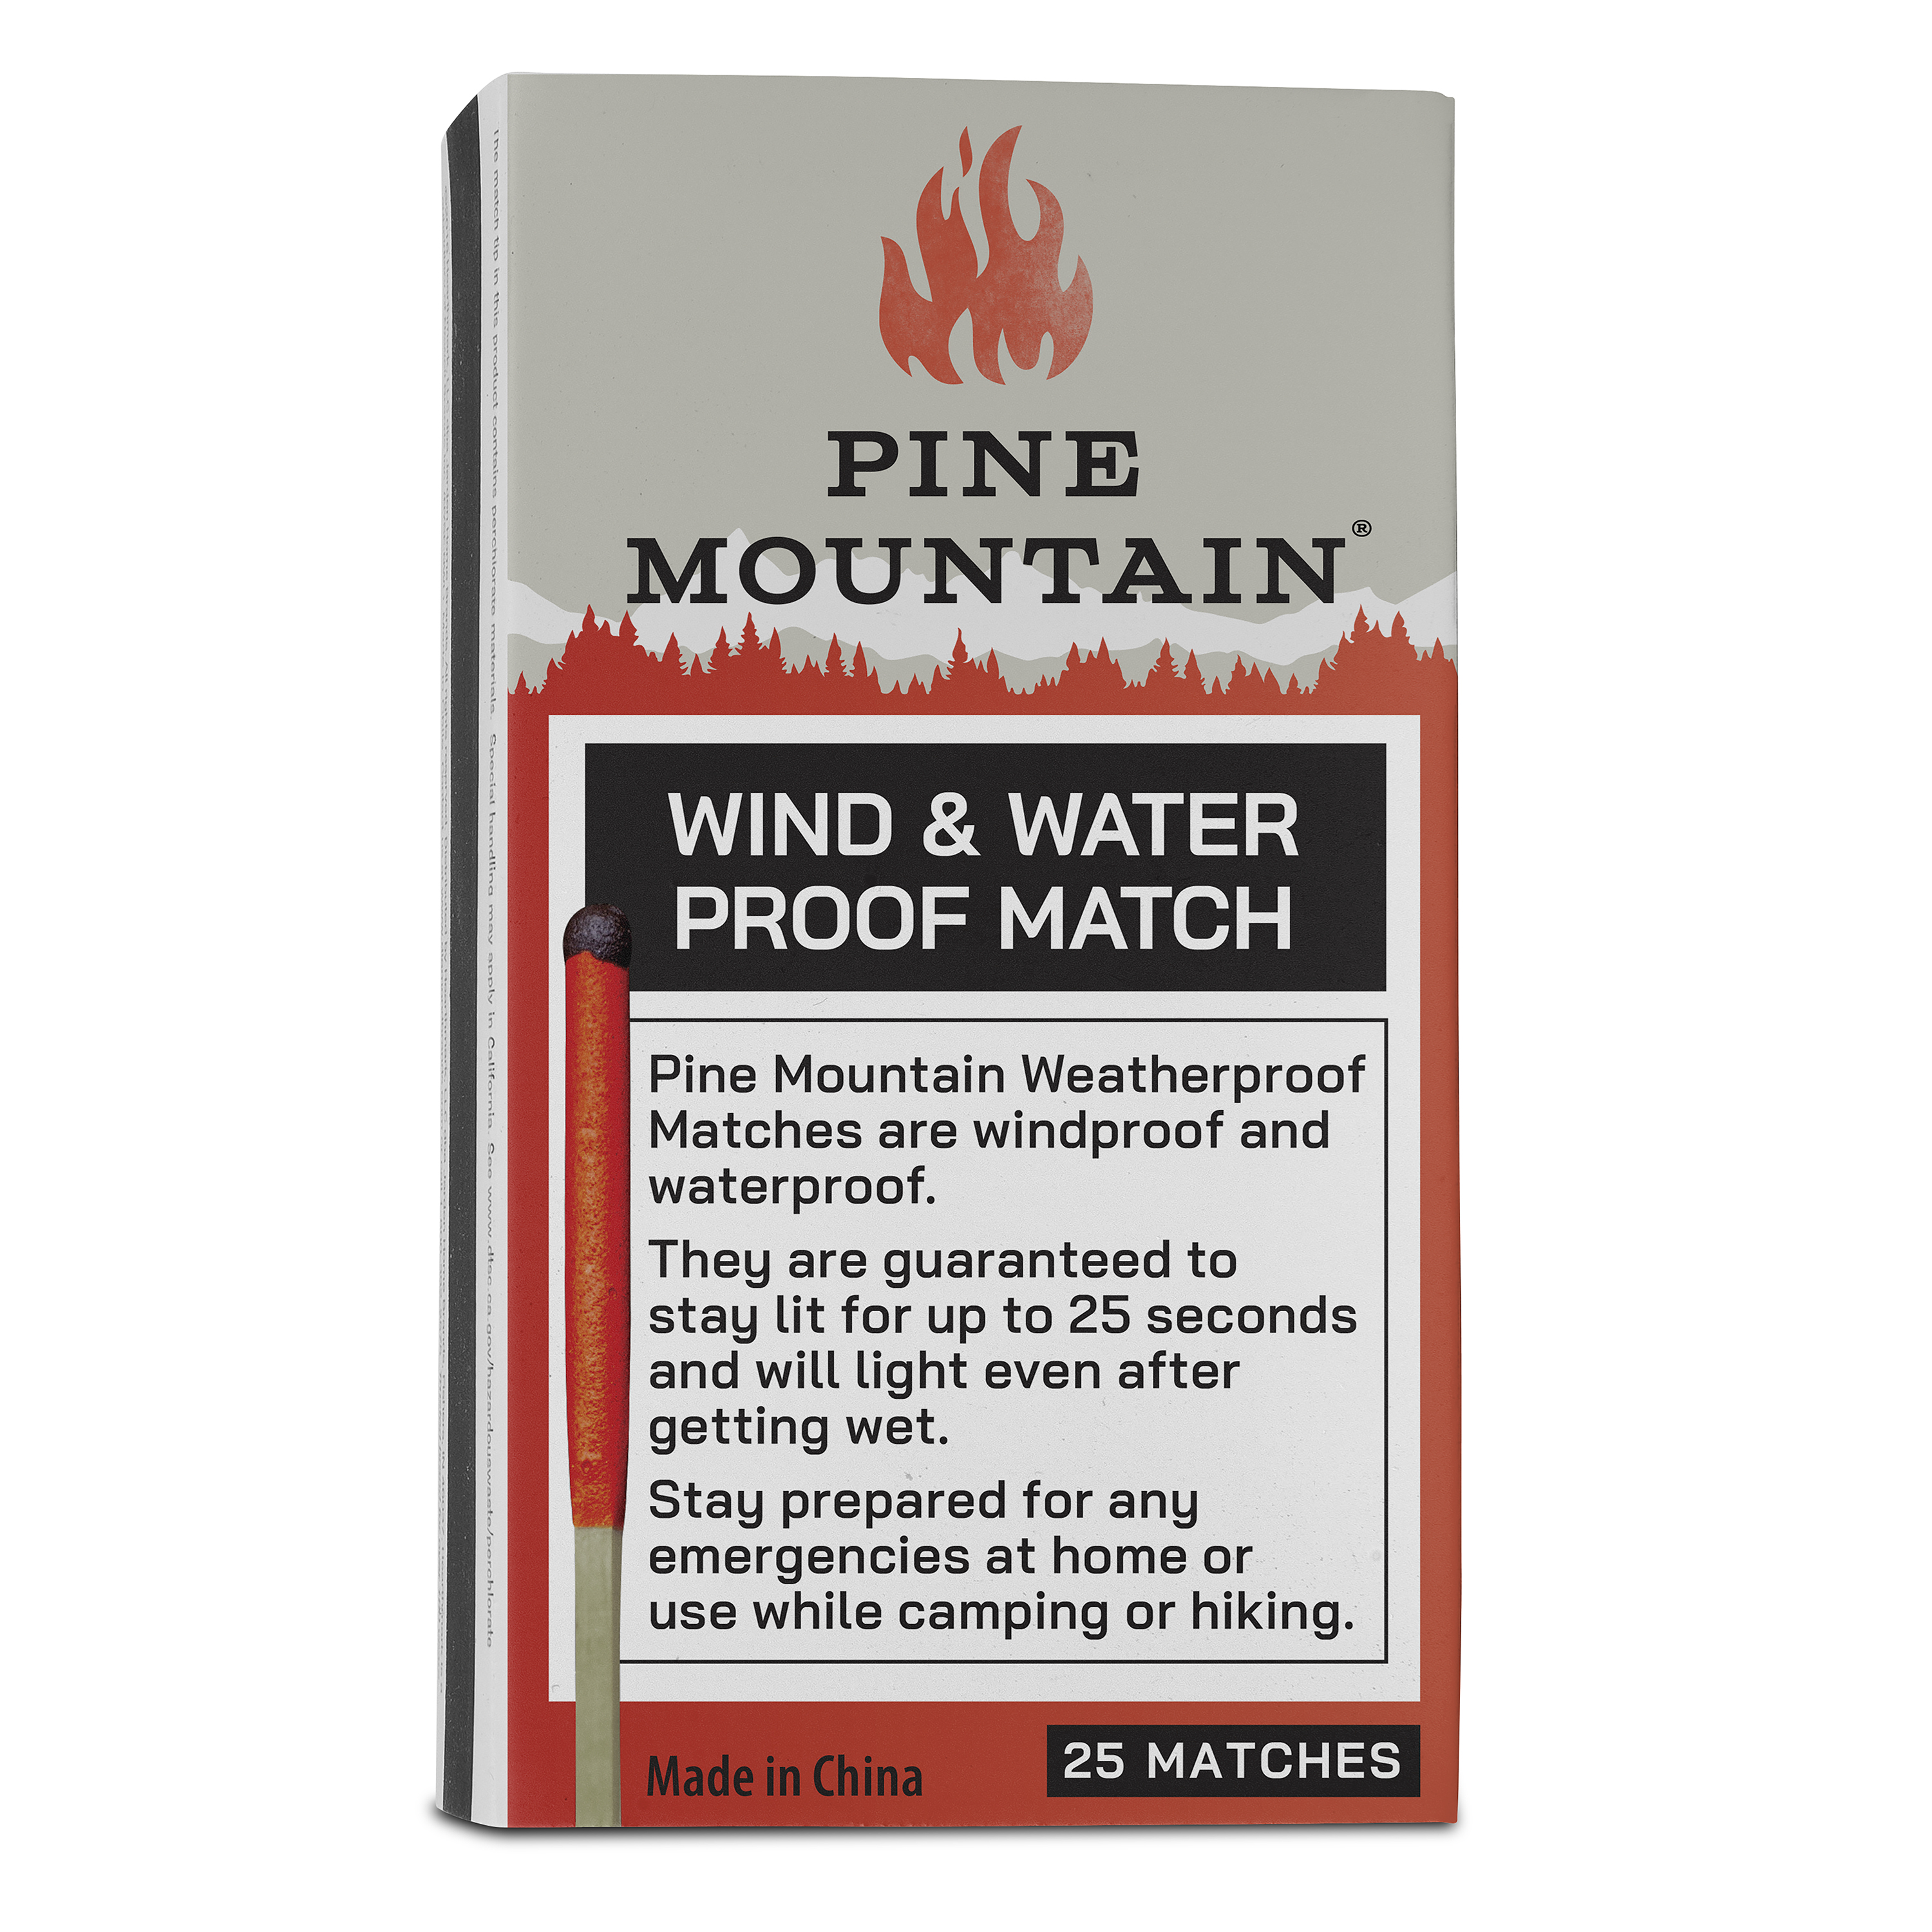 Pine Mountain Weatherproof Match, Match for Extreme Conditions, 25 Count, Tan and Red - image 2 of 5